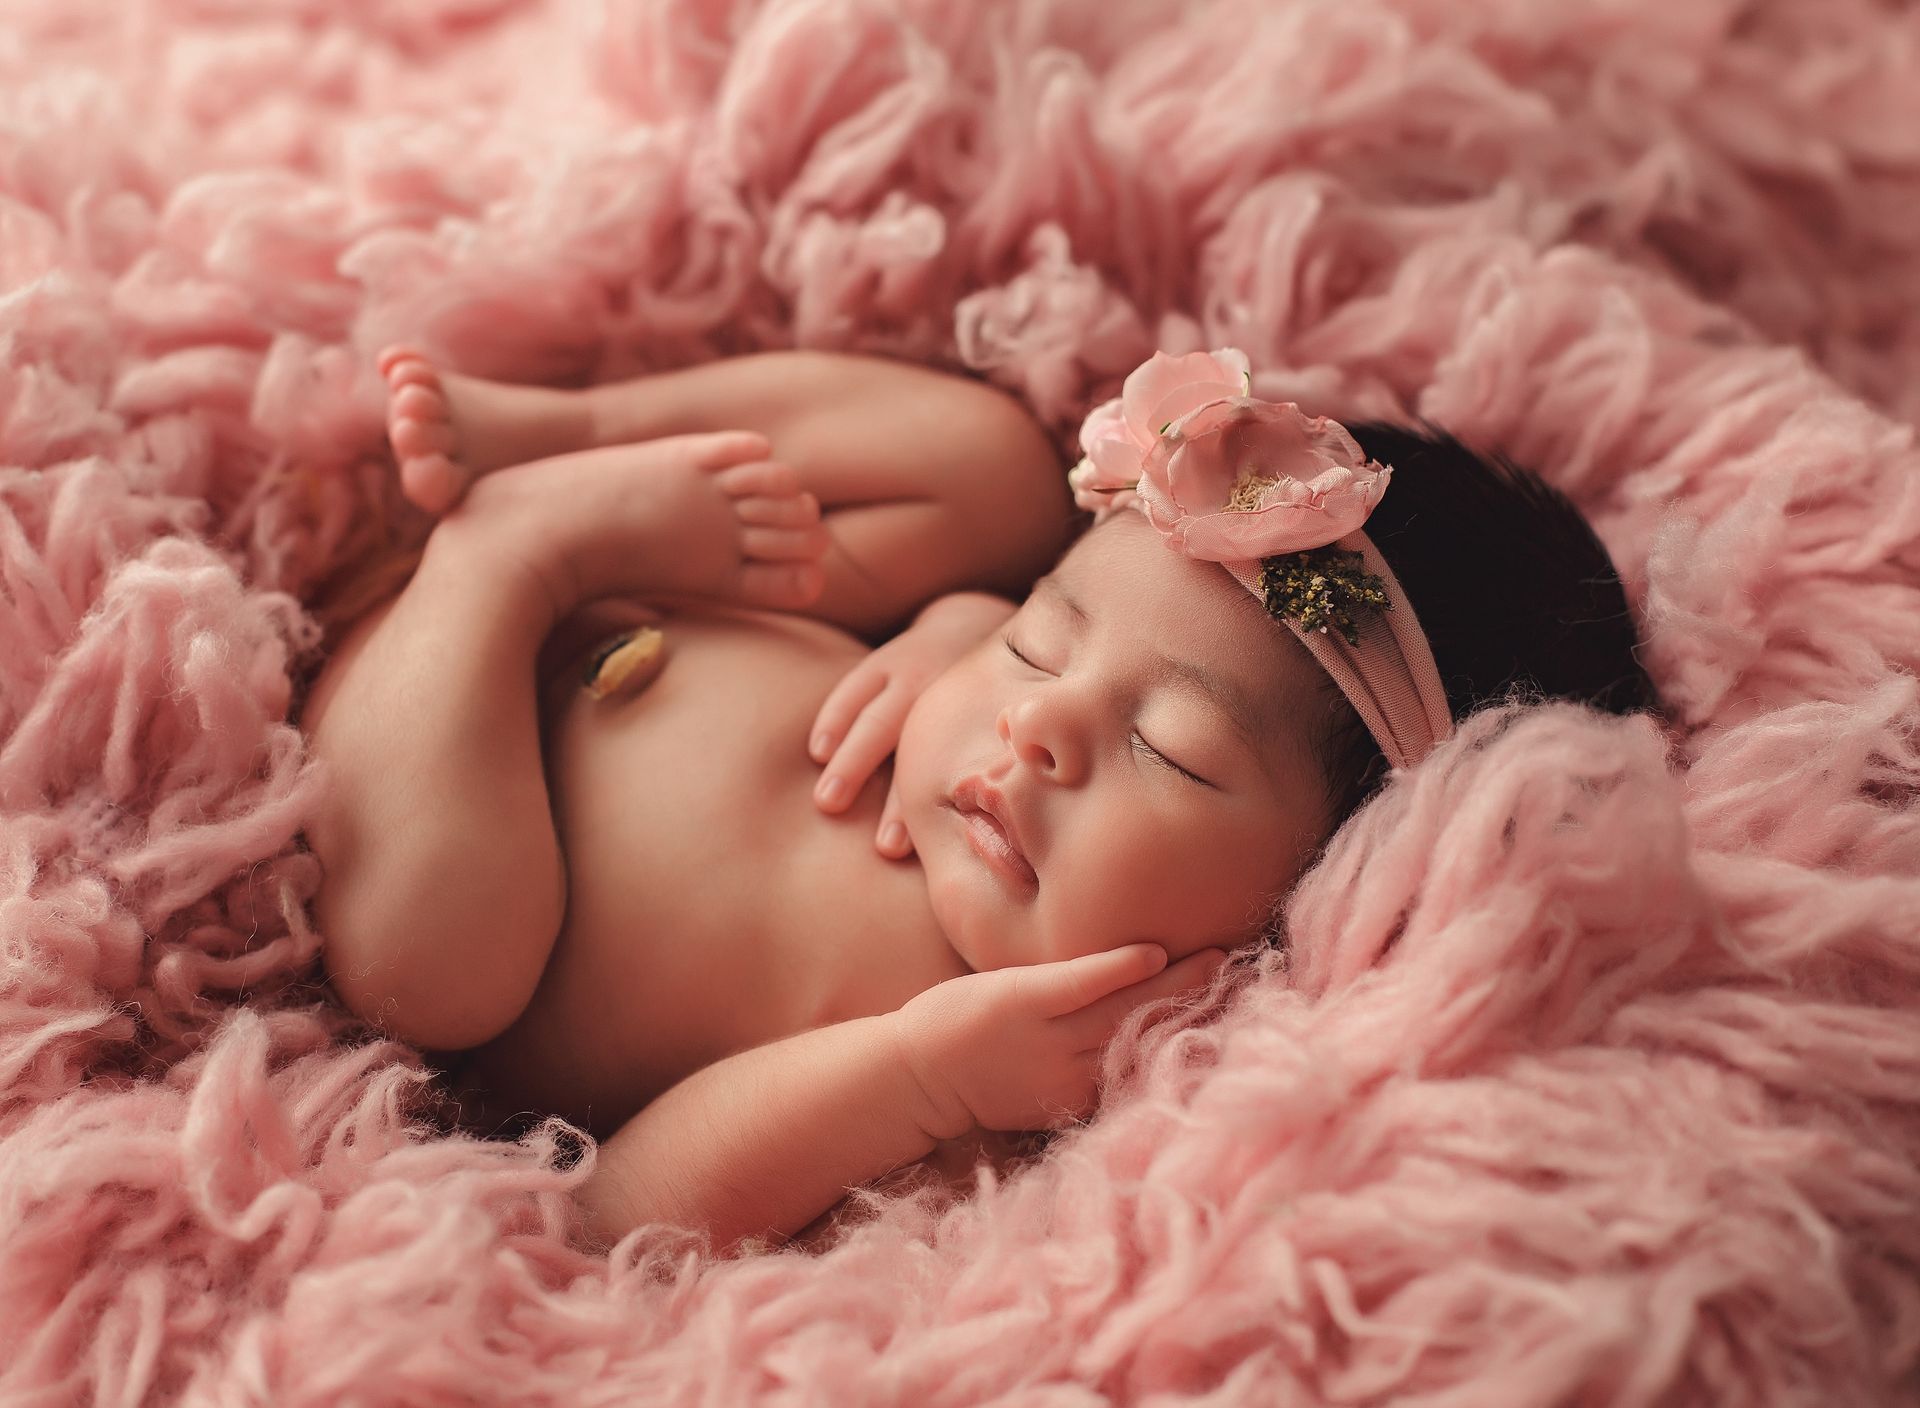 A newborn baby girl is sleeping on a pink blanket.